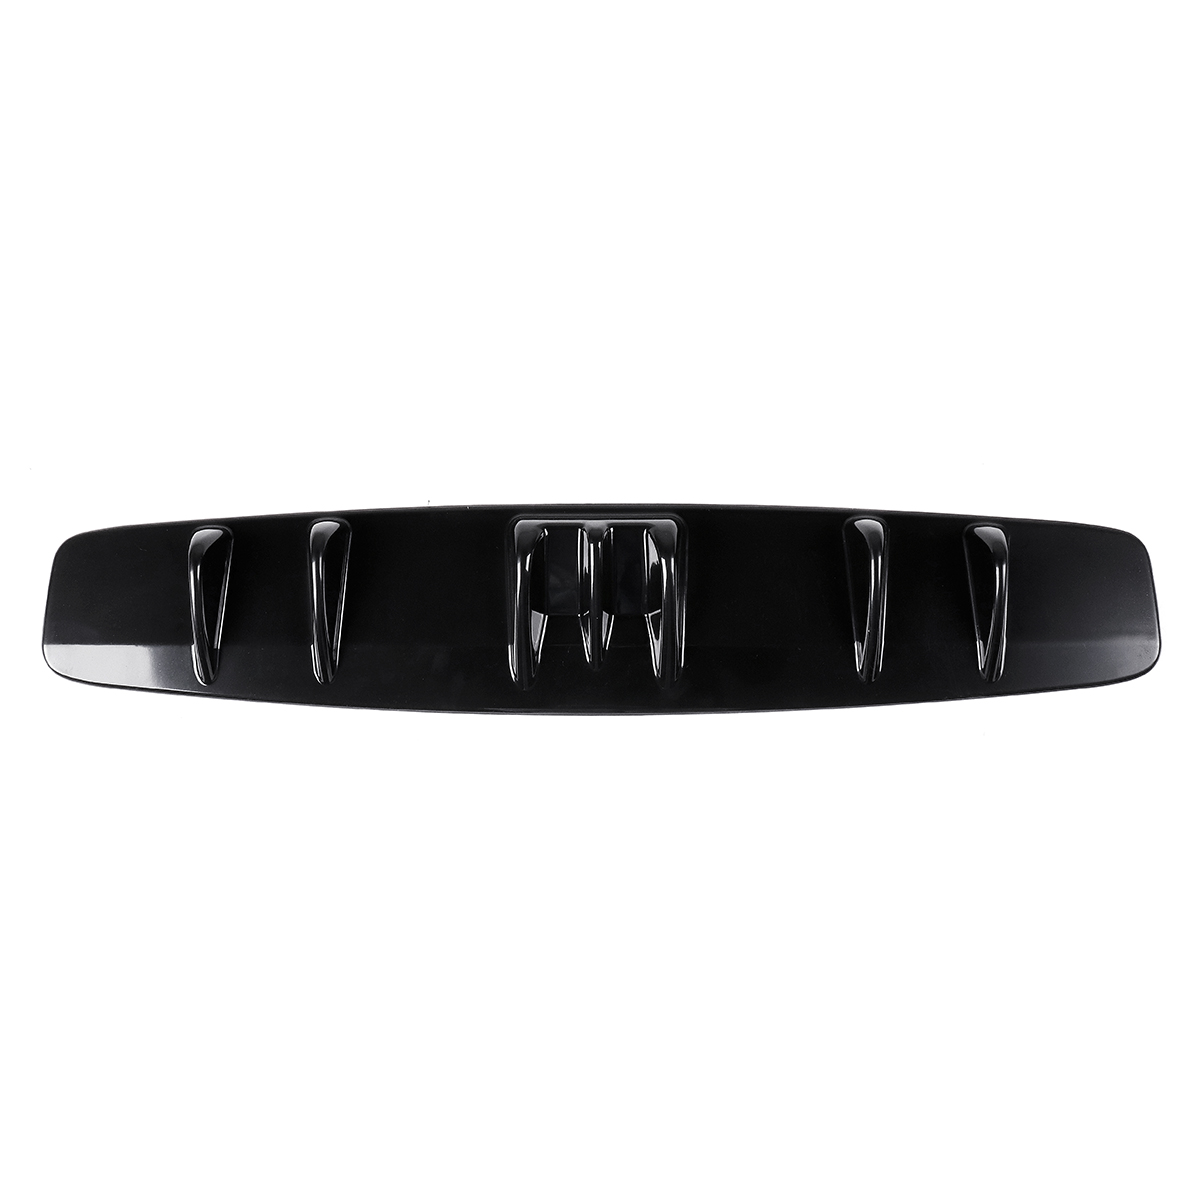 Glossy-Black-Car-ABS-Rear-Style-Curved-Bumper-Protector-Lip-Diffuser-1459899